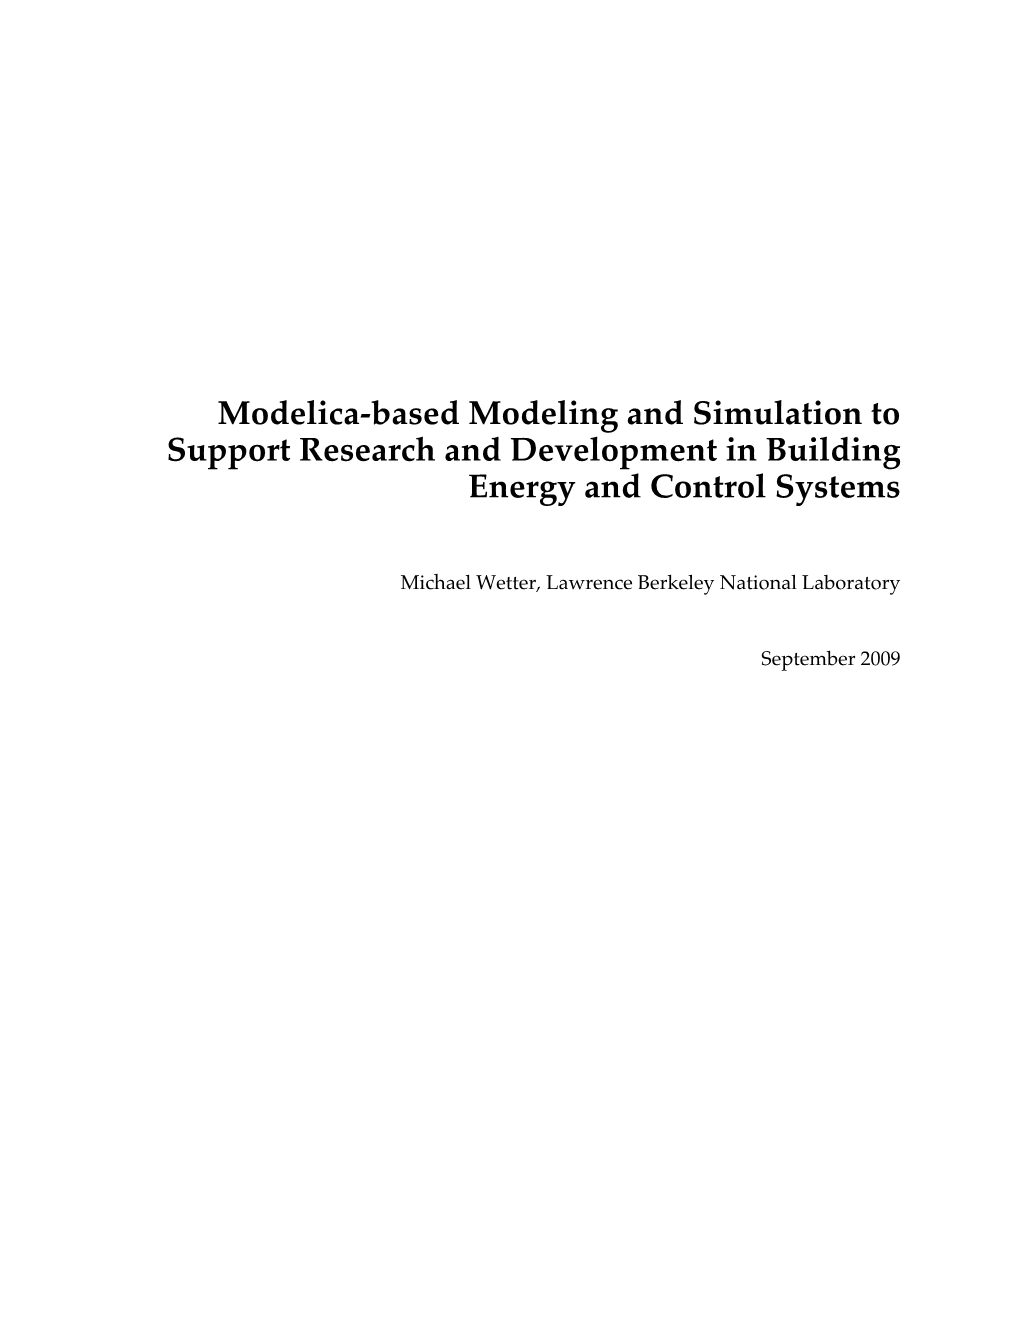 Modelica-Based Modeling and Simulation to Support Research and Development in Building Energy and Control Systems